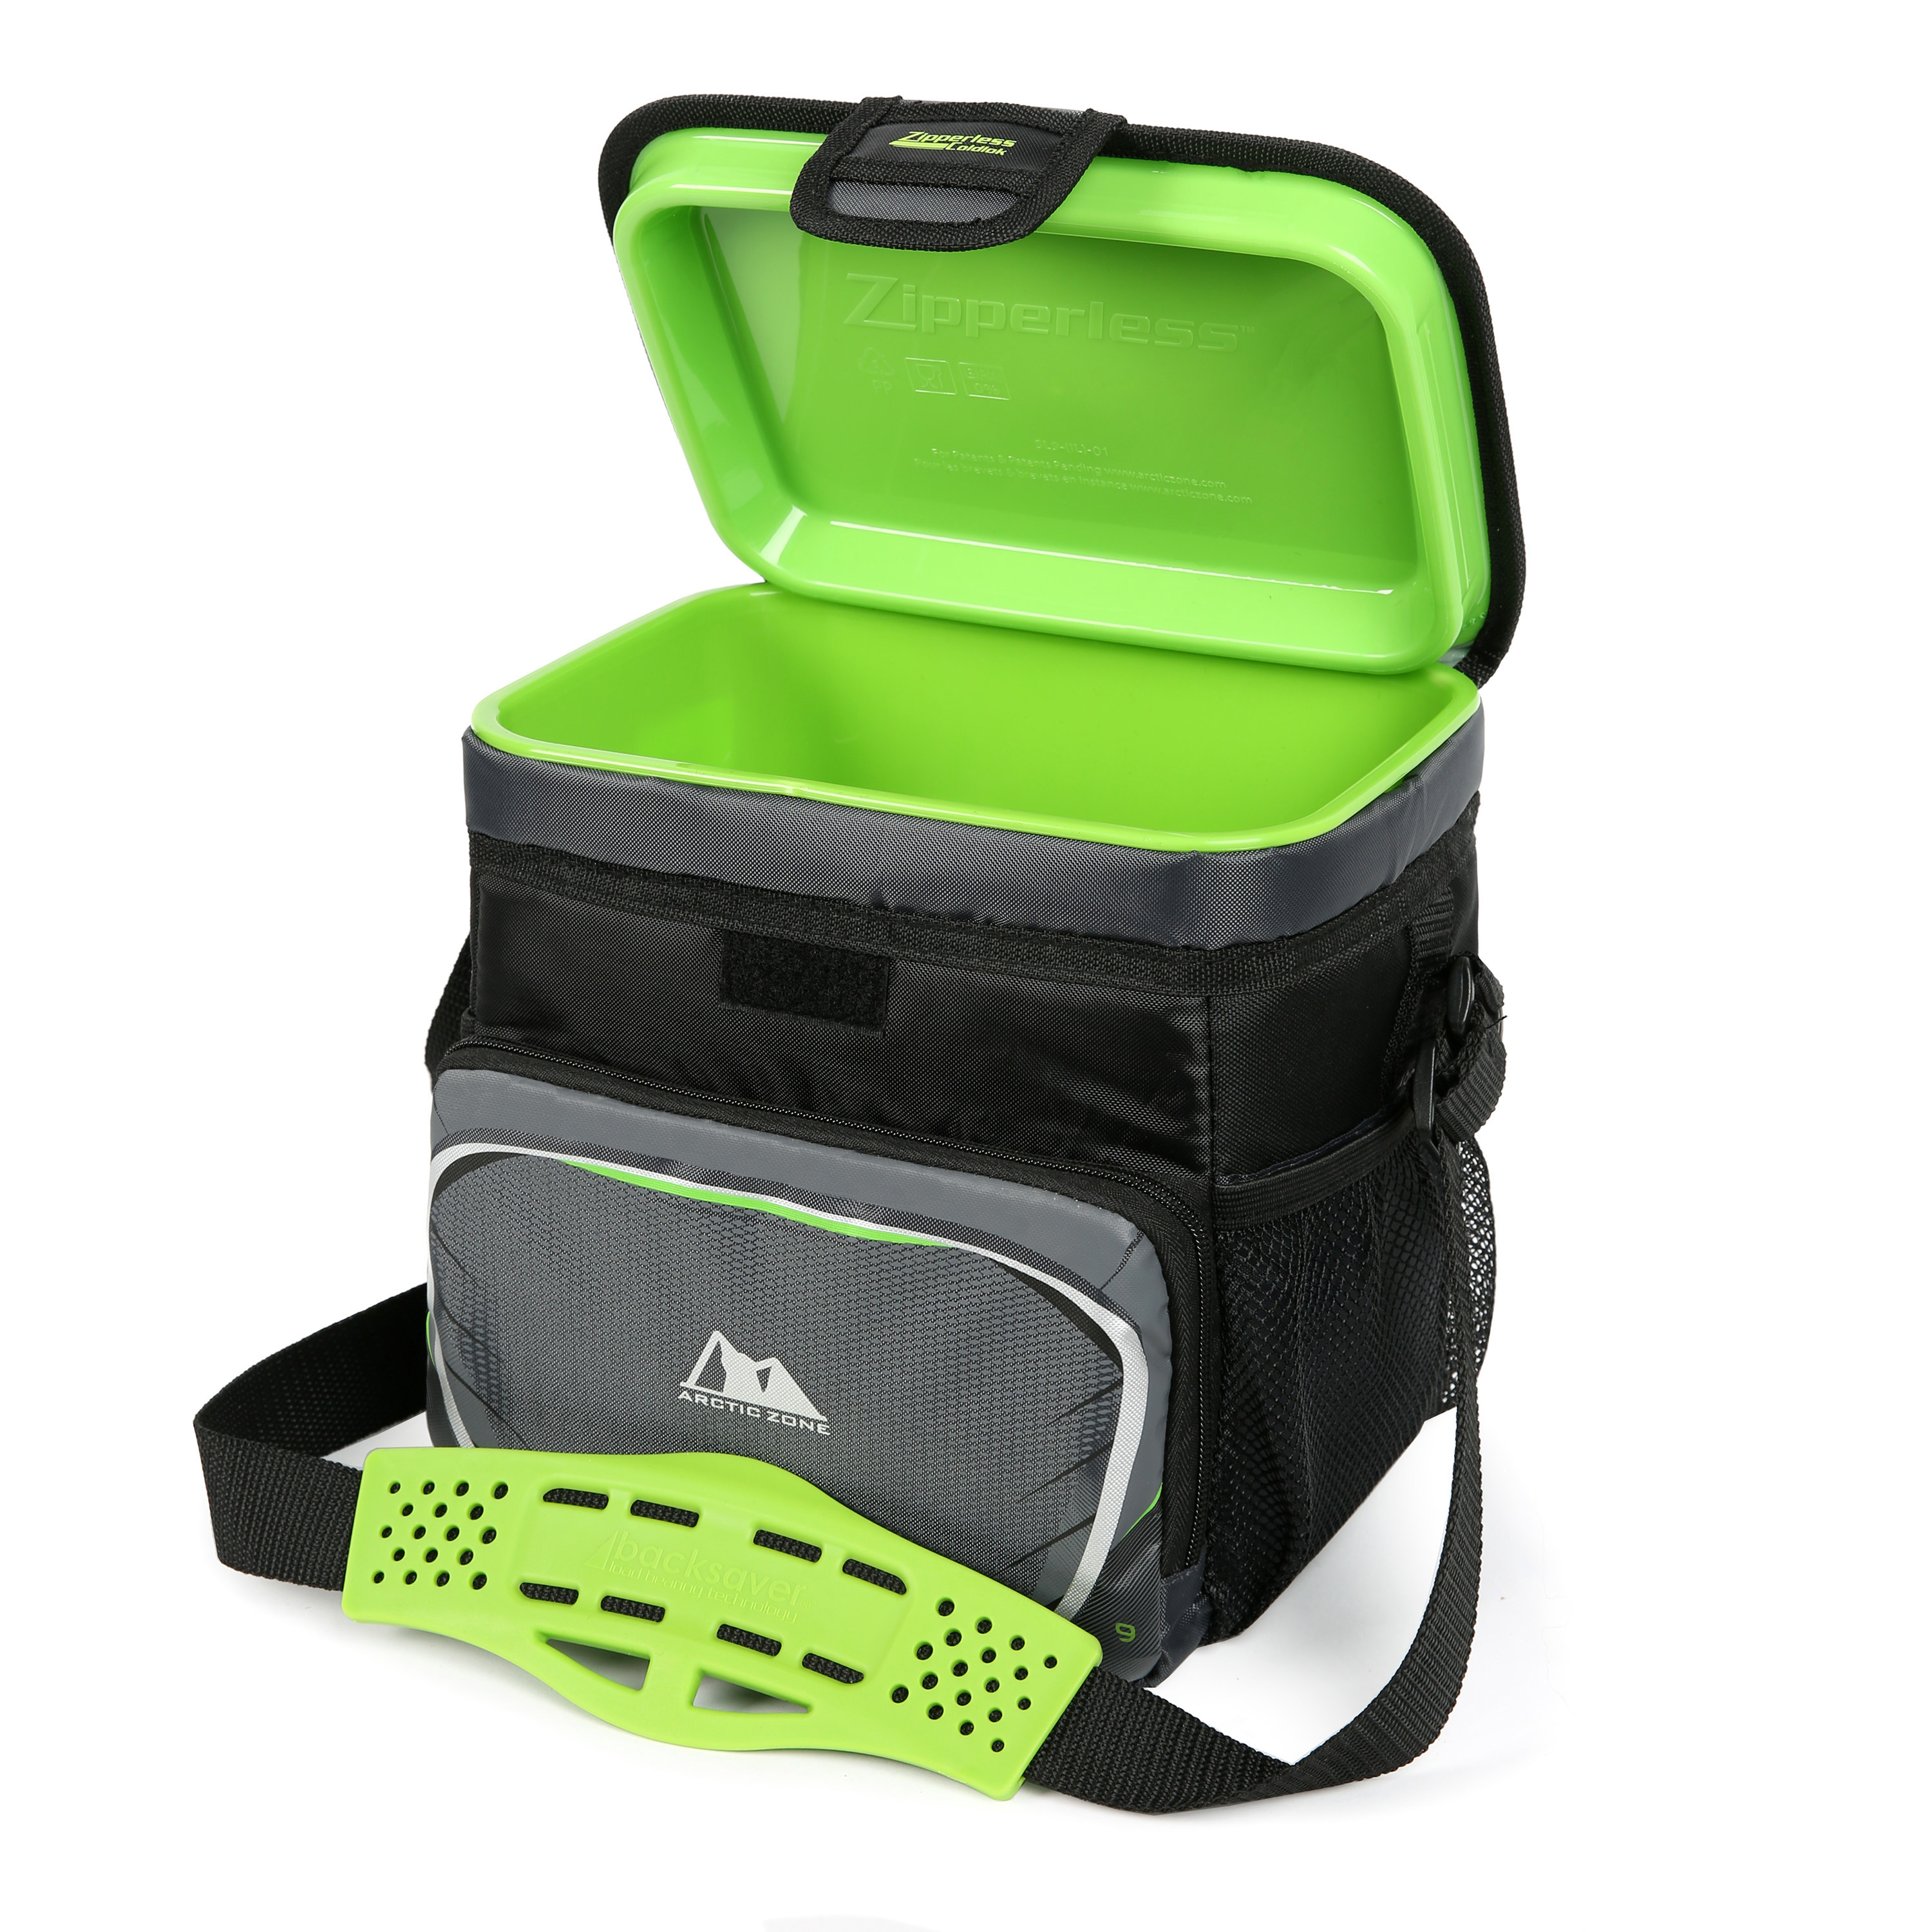 Arctic Zone 9 cans Zipperless Soft Sided Cooler with Hard Liner, Grey and Green - image 4 of 11